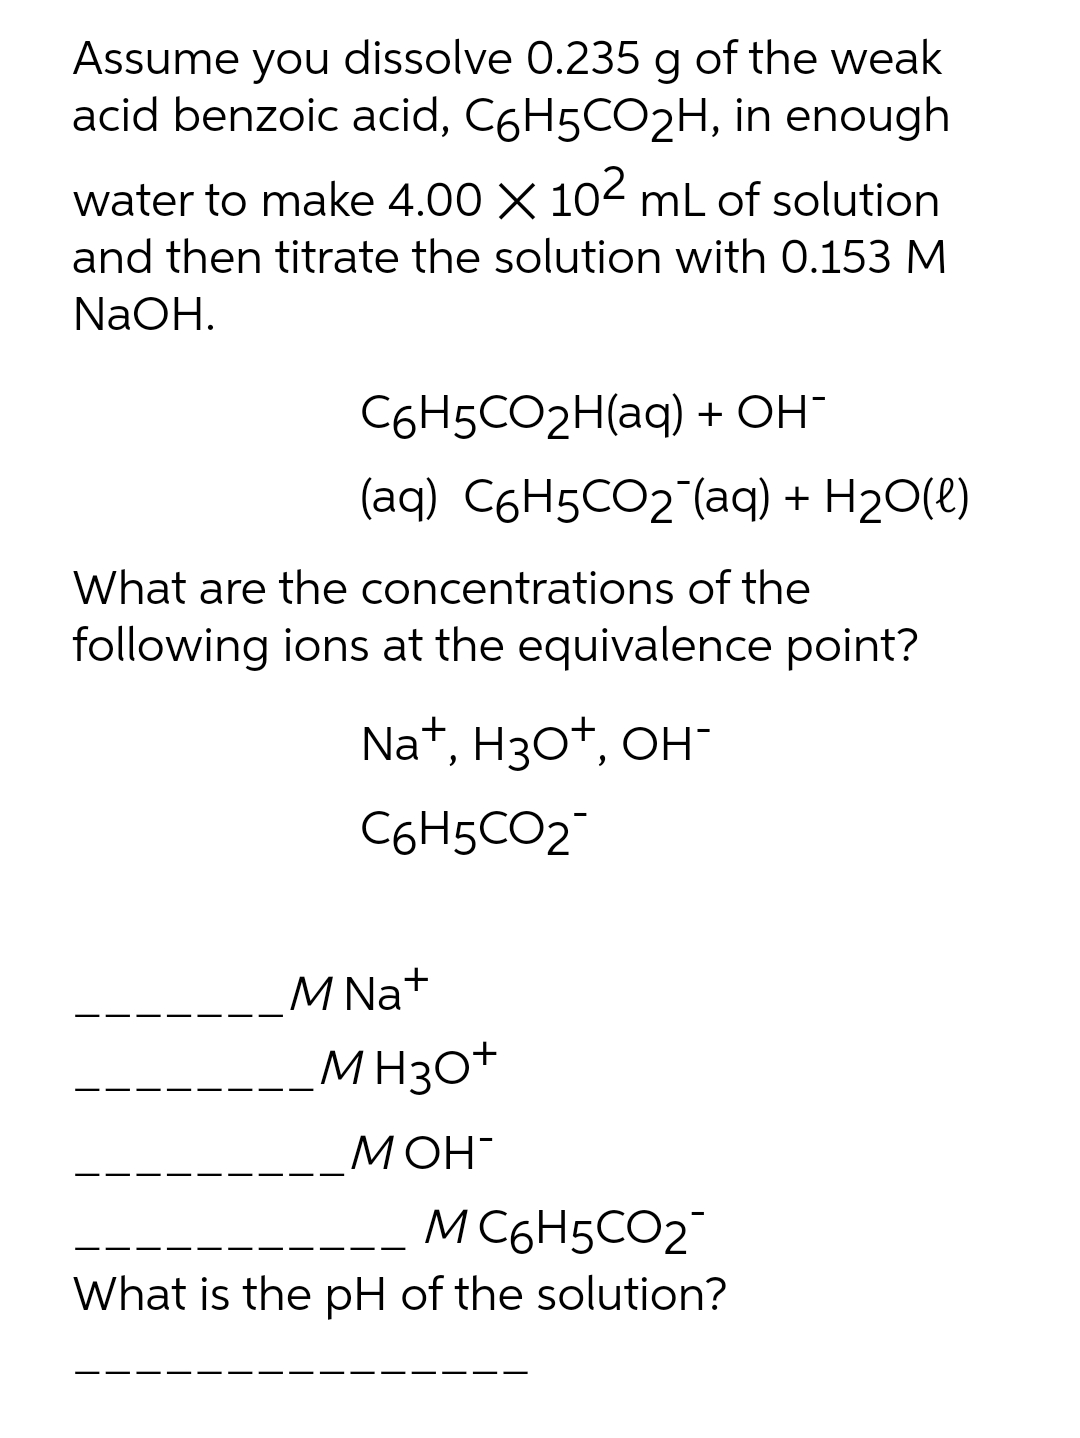 Assume you dissolve 0.235 g of the weak
acid benzoic acid, C6H5CO2H, in enough
water to make 4.00 X 102 mL of solution
and then titrate the solution with 0.153 M
NaOH.
C6H5CO2H(aq) + OH
(aq) C6H5CO2 (aq) + H20(e)
What are the concentrations of the
following ions at the equivalence point?
Nat, Hзоt, он-
C6H5CO2
M Na+
MH30+
МОН-
M C6H5CO2
What is the pH of the solution?
